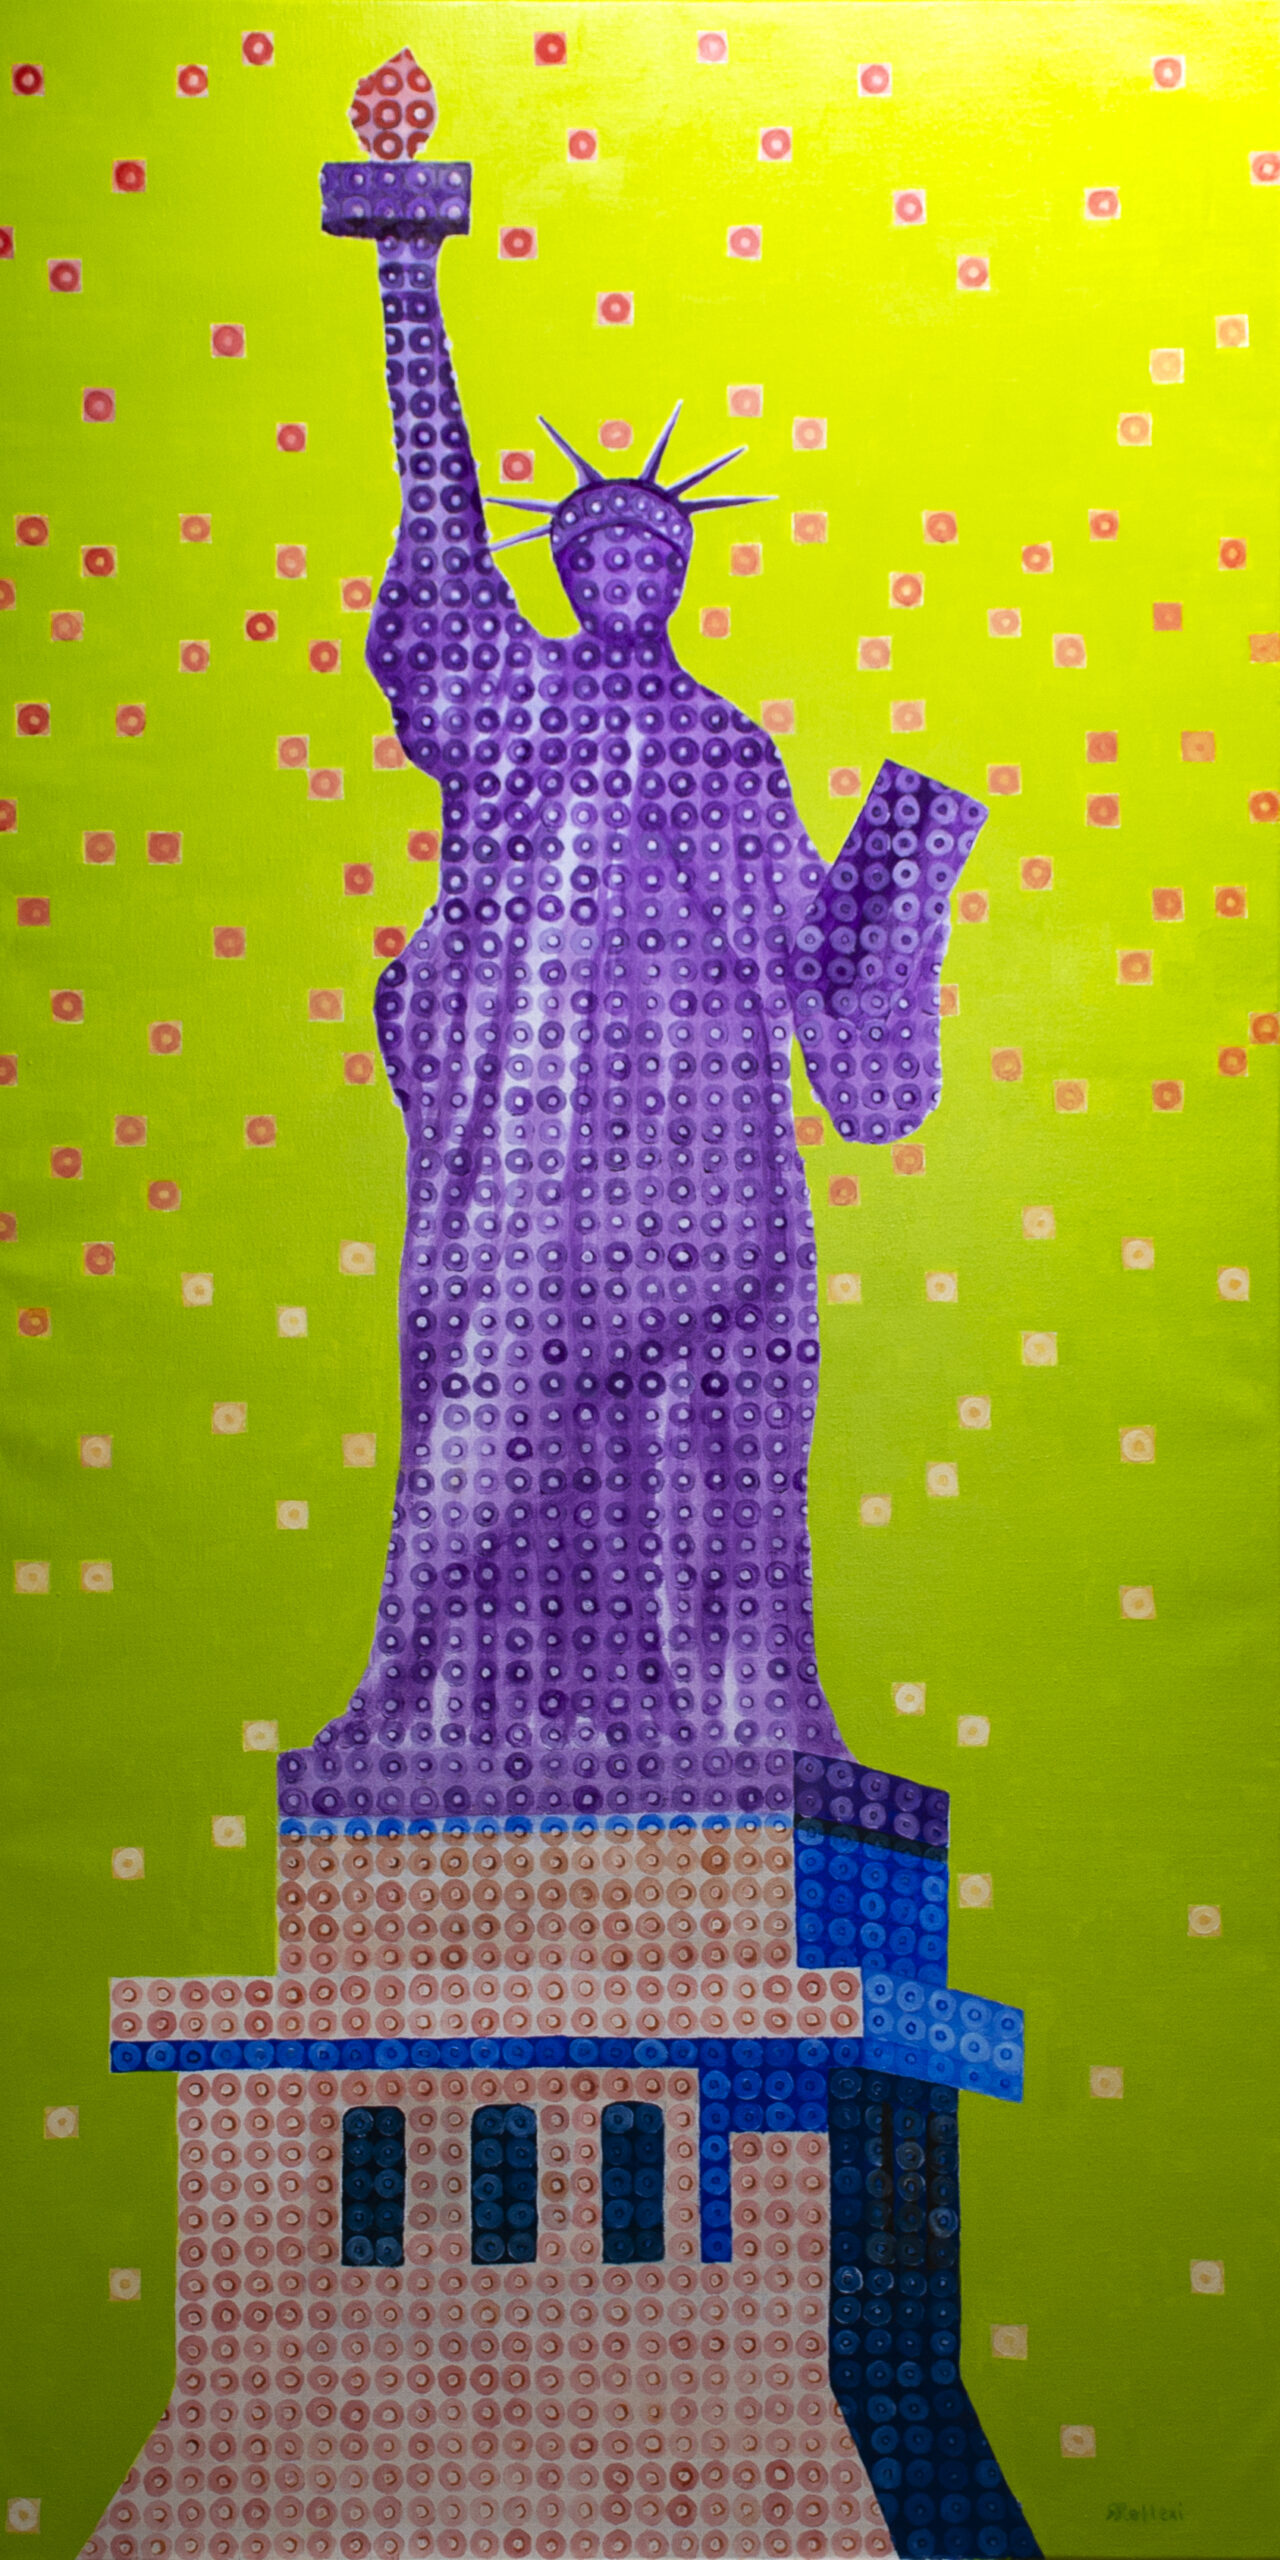 Why is the Statue of Liberty in this painting covered by hundreds of nipples?